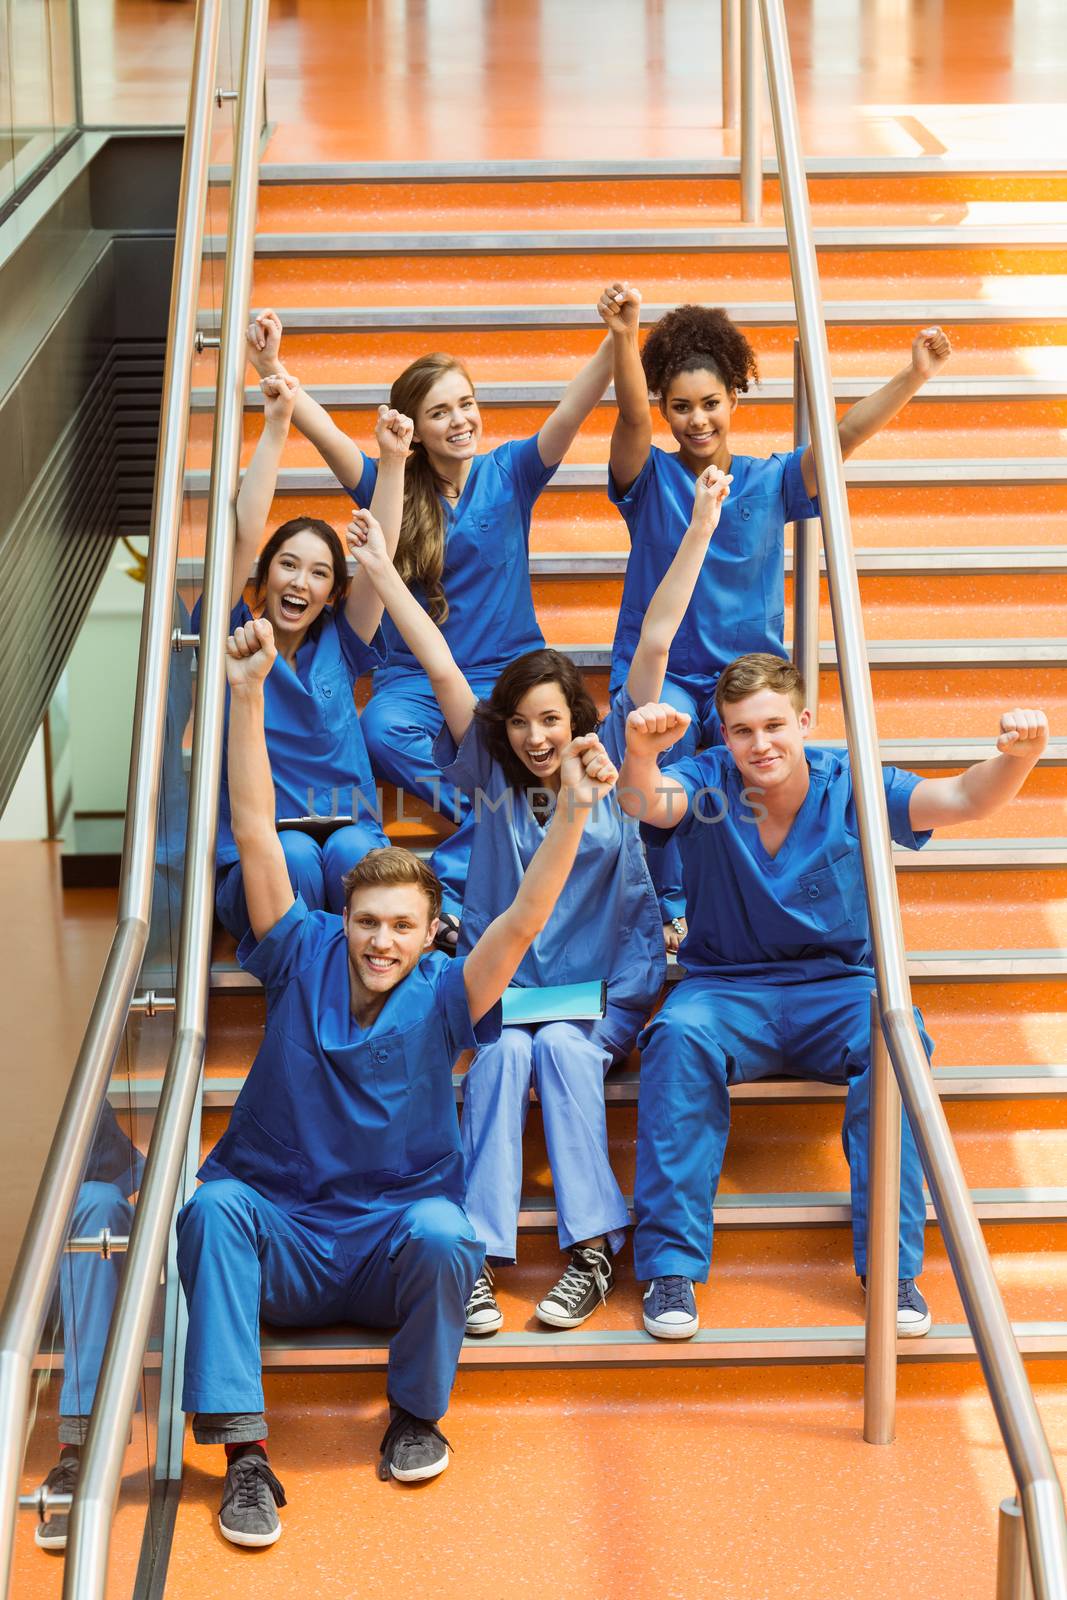 Medical students cheering on the steps at the university